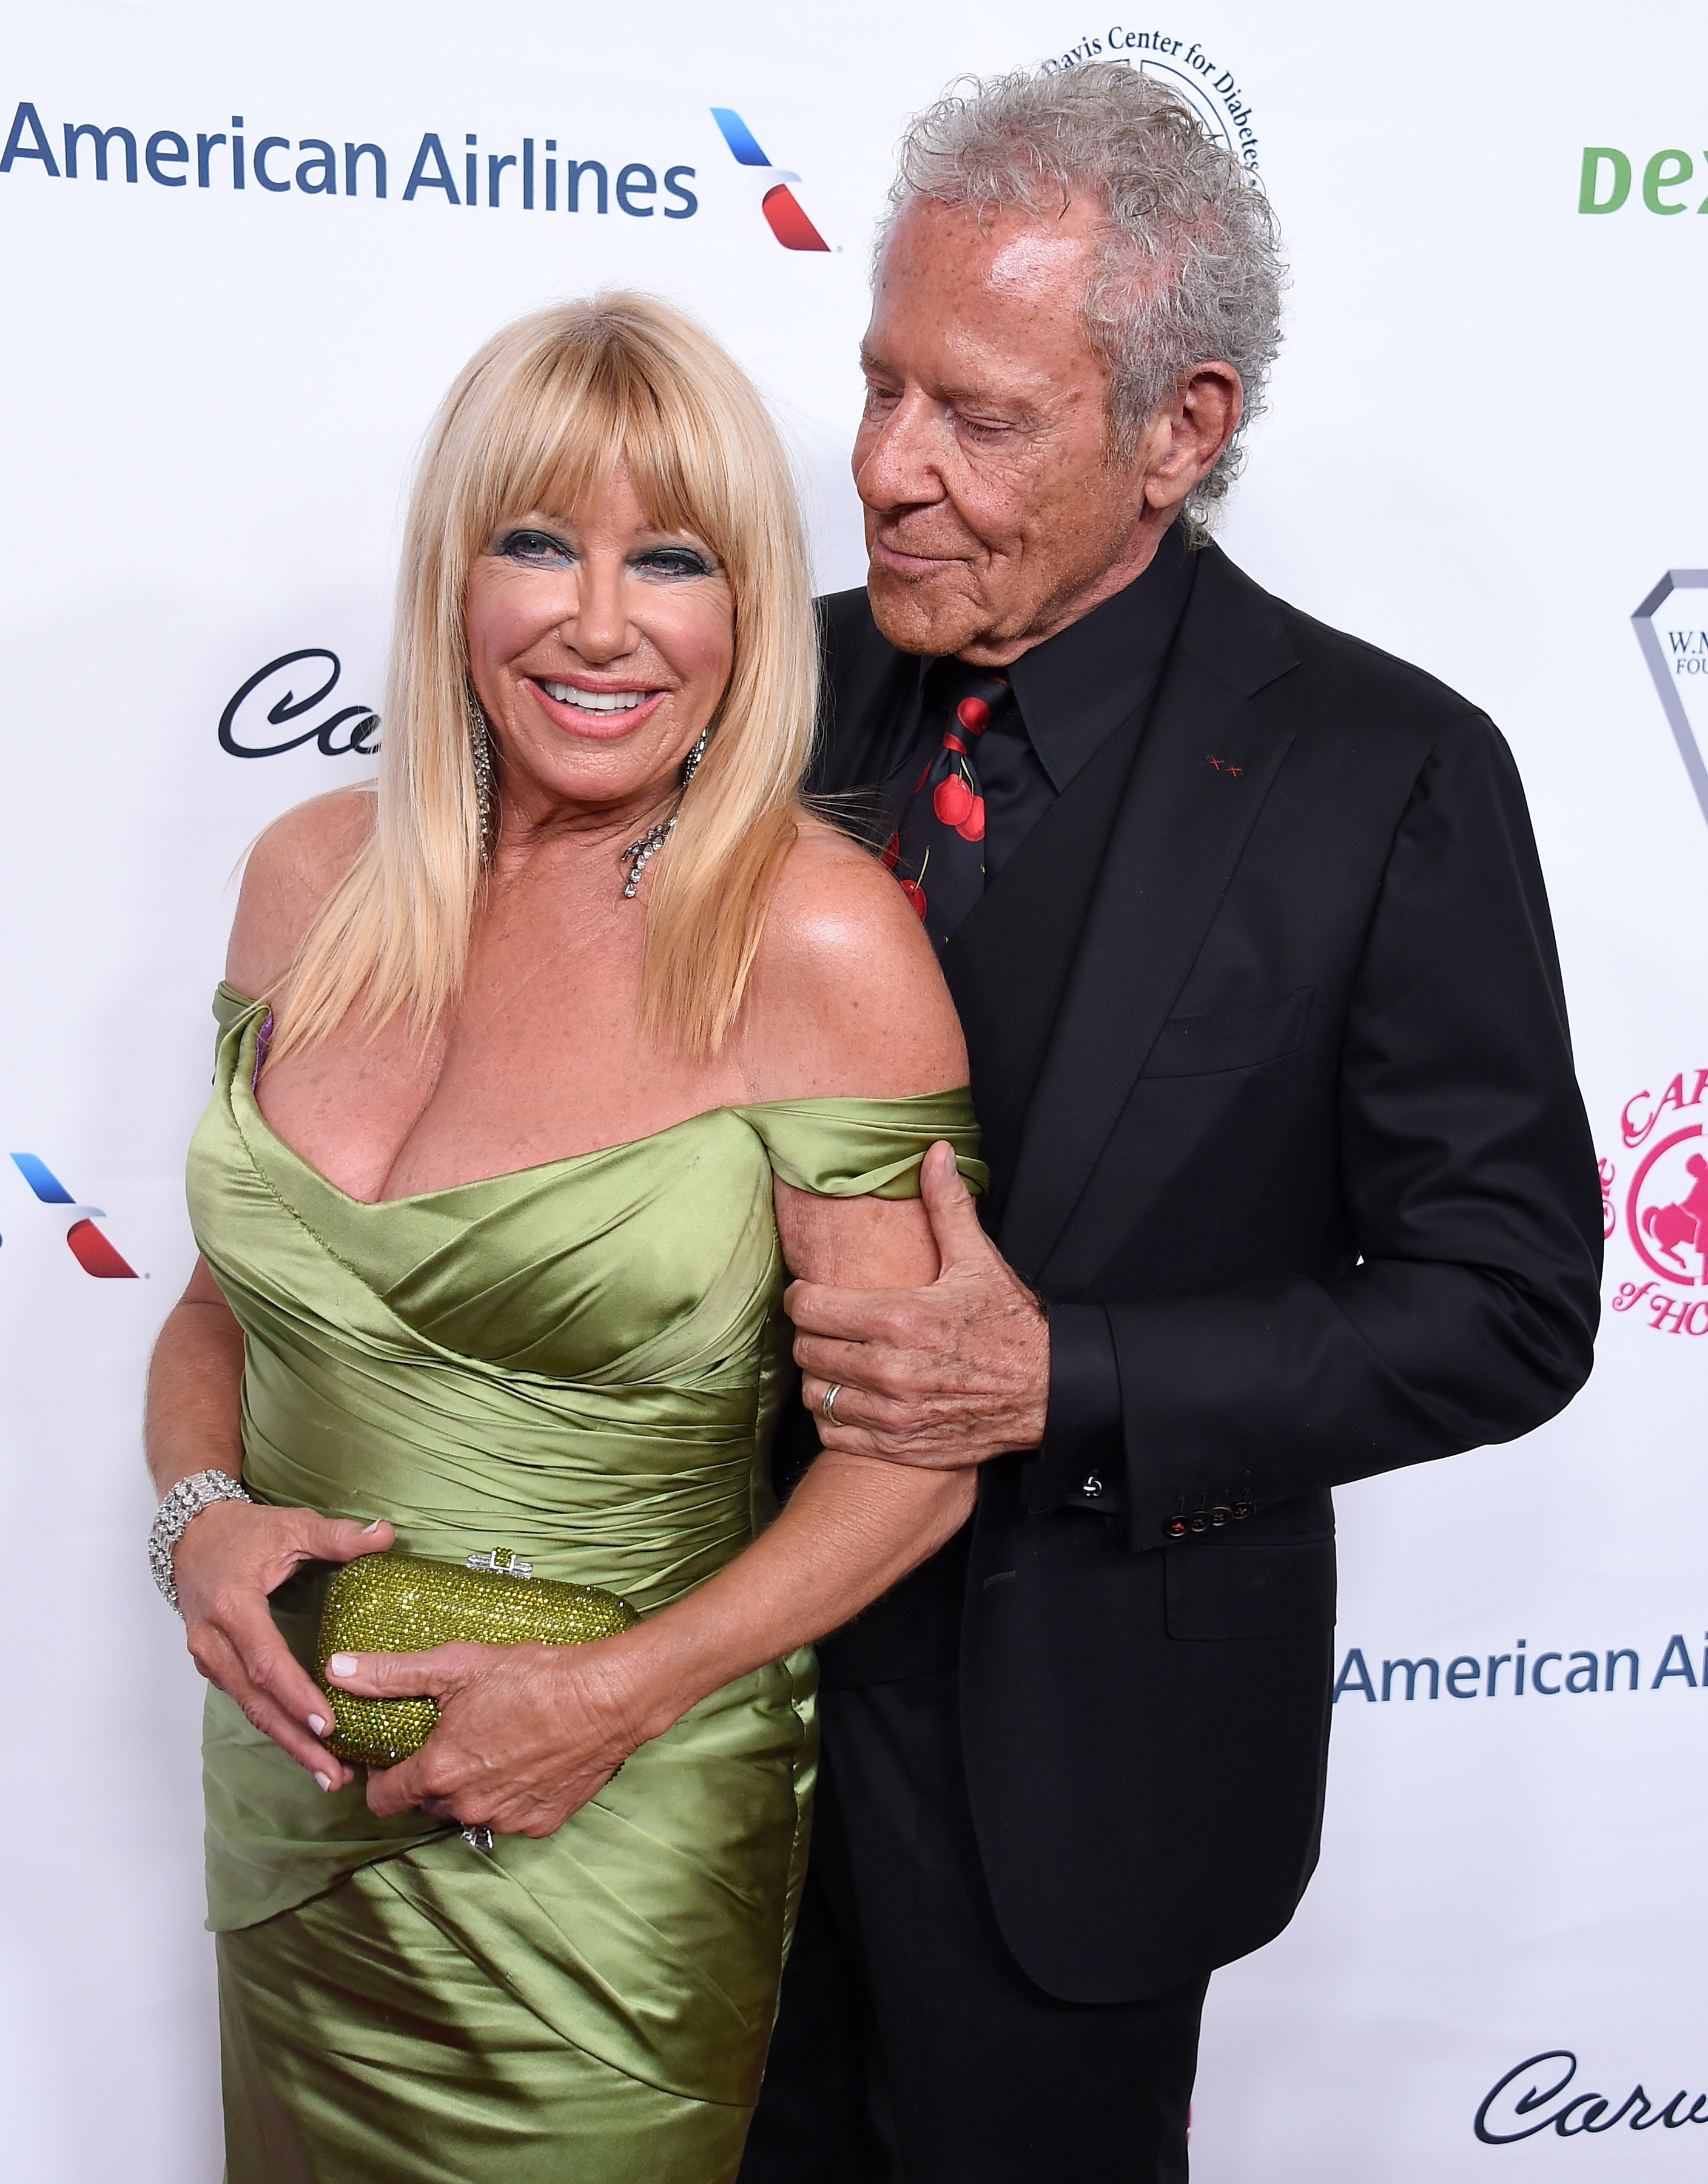 Suzanne Somers and Alan Hamel at the Carousel Of Hope Ball in Beverly Hills, California on October 6, 2018 | Source: Getty Images